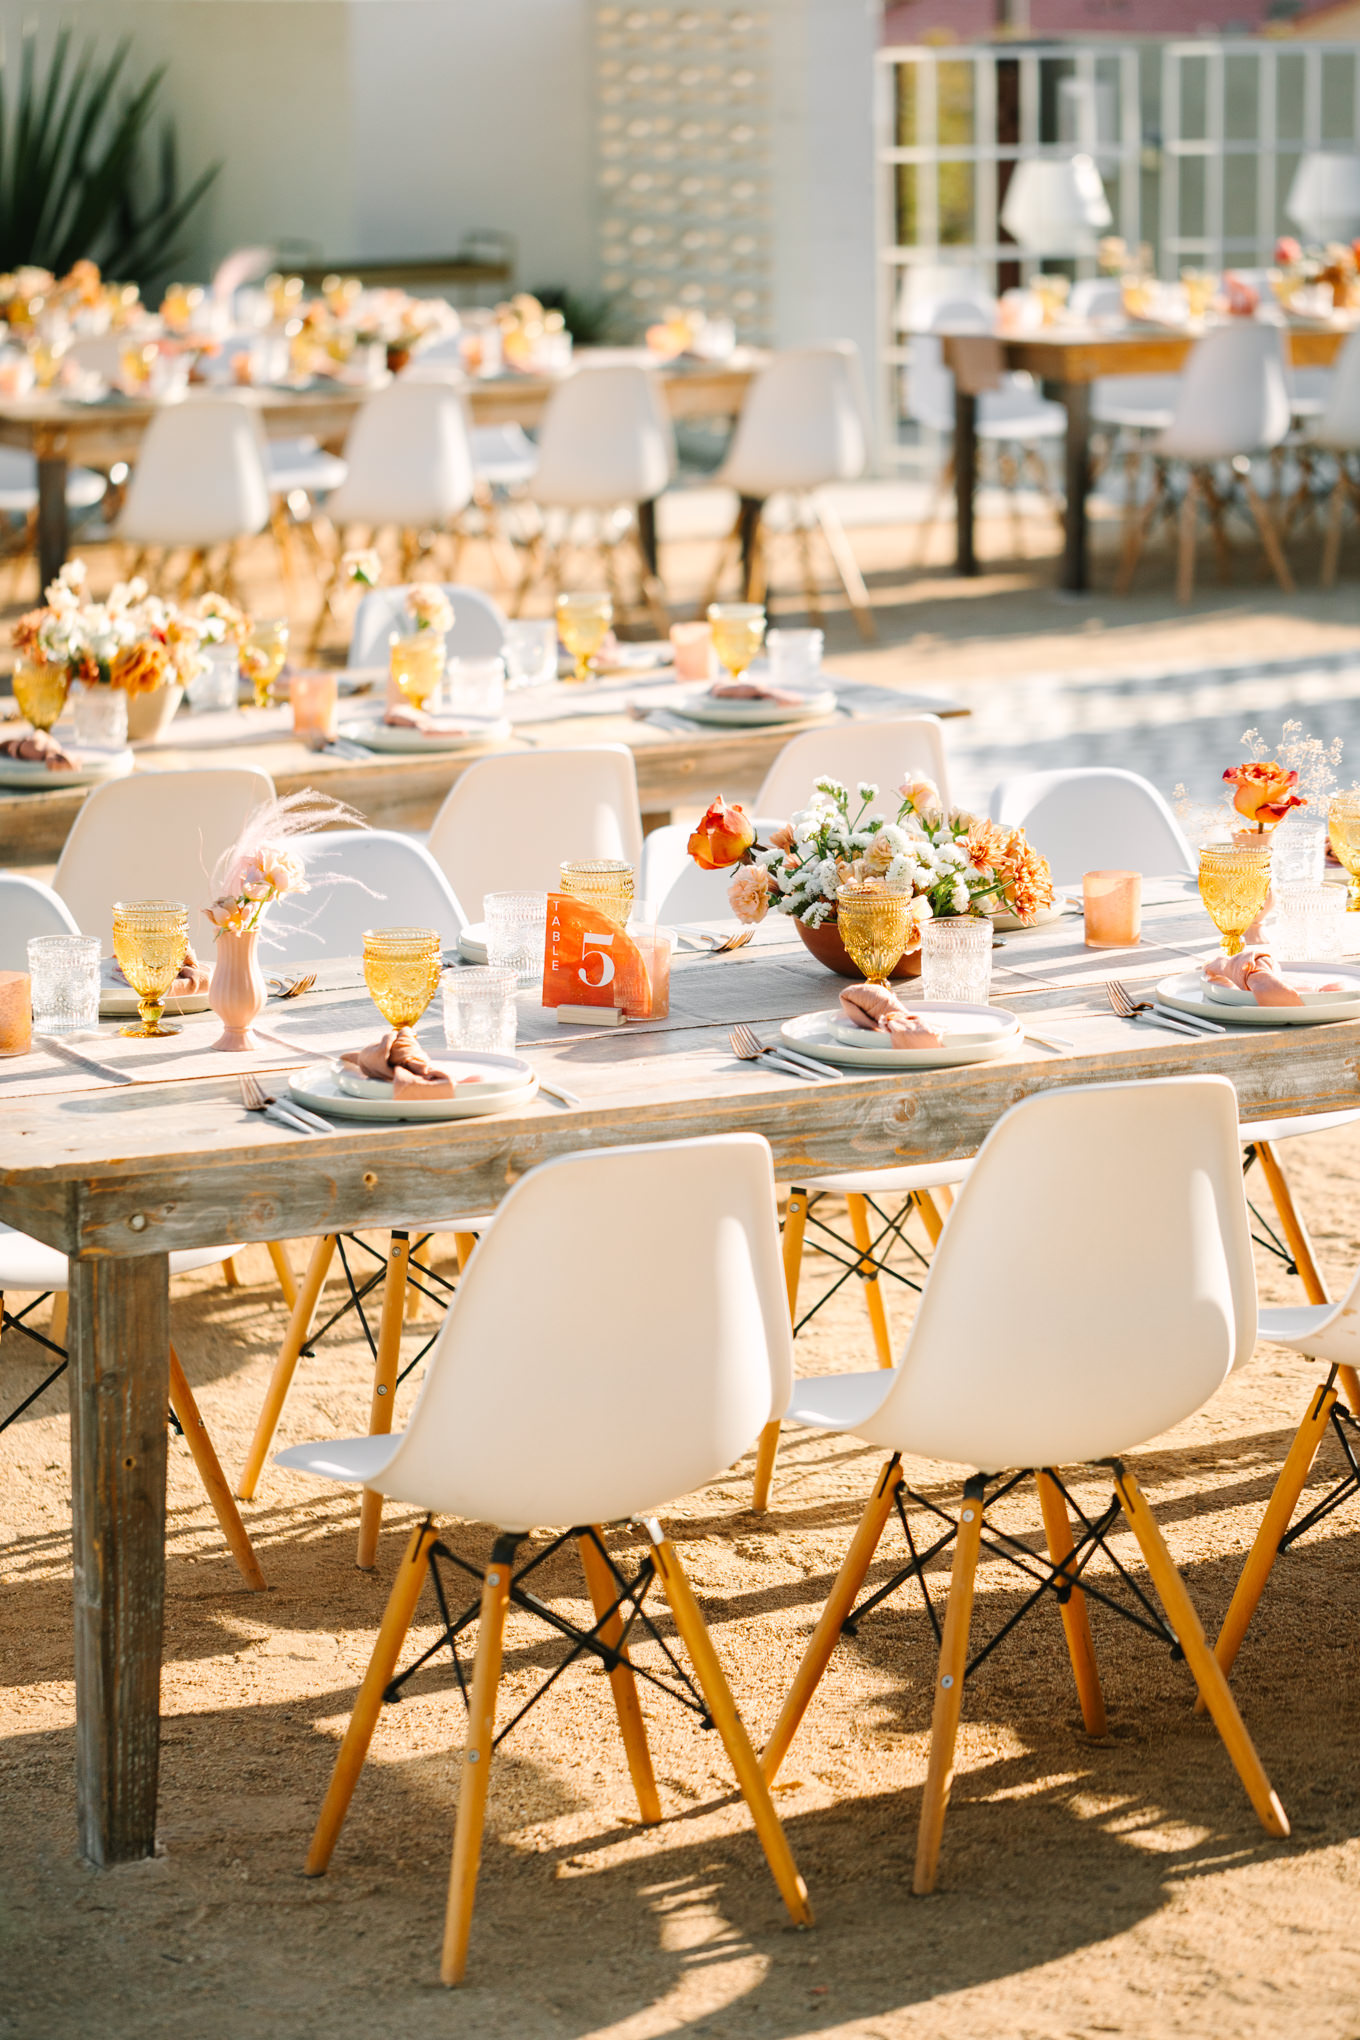 Tables at wedding dinner | Pink and orange Lautner Compound wedding | Colorful Palm Springs wedding photography | #palmspringsphotographer #palmspringswedding #lautnercompound #southerncaliforniawedding  Source: Mary Costa Photography | Los Angeles